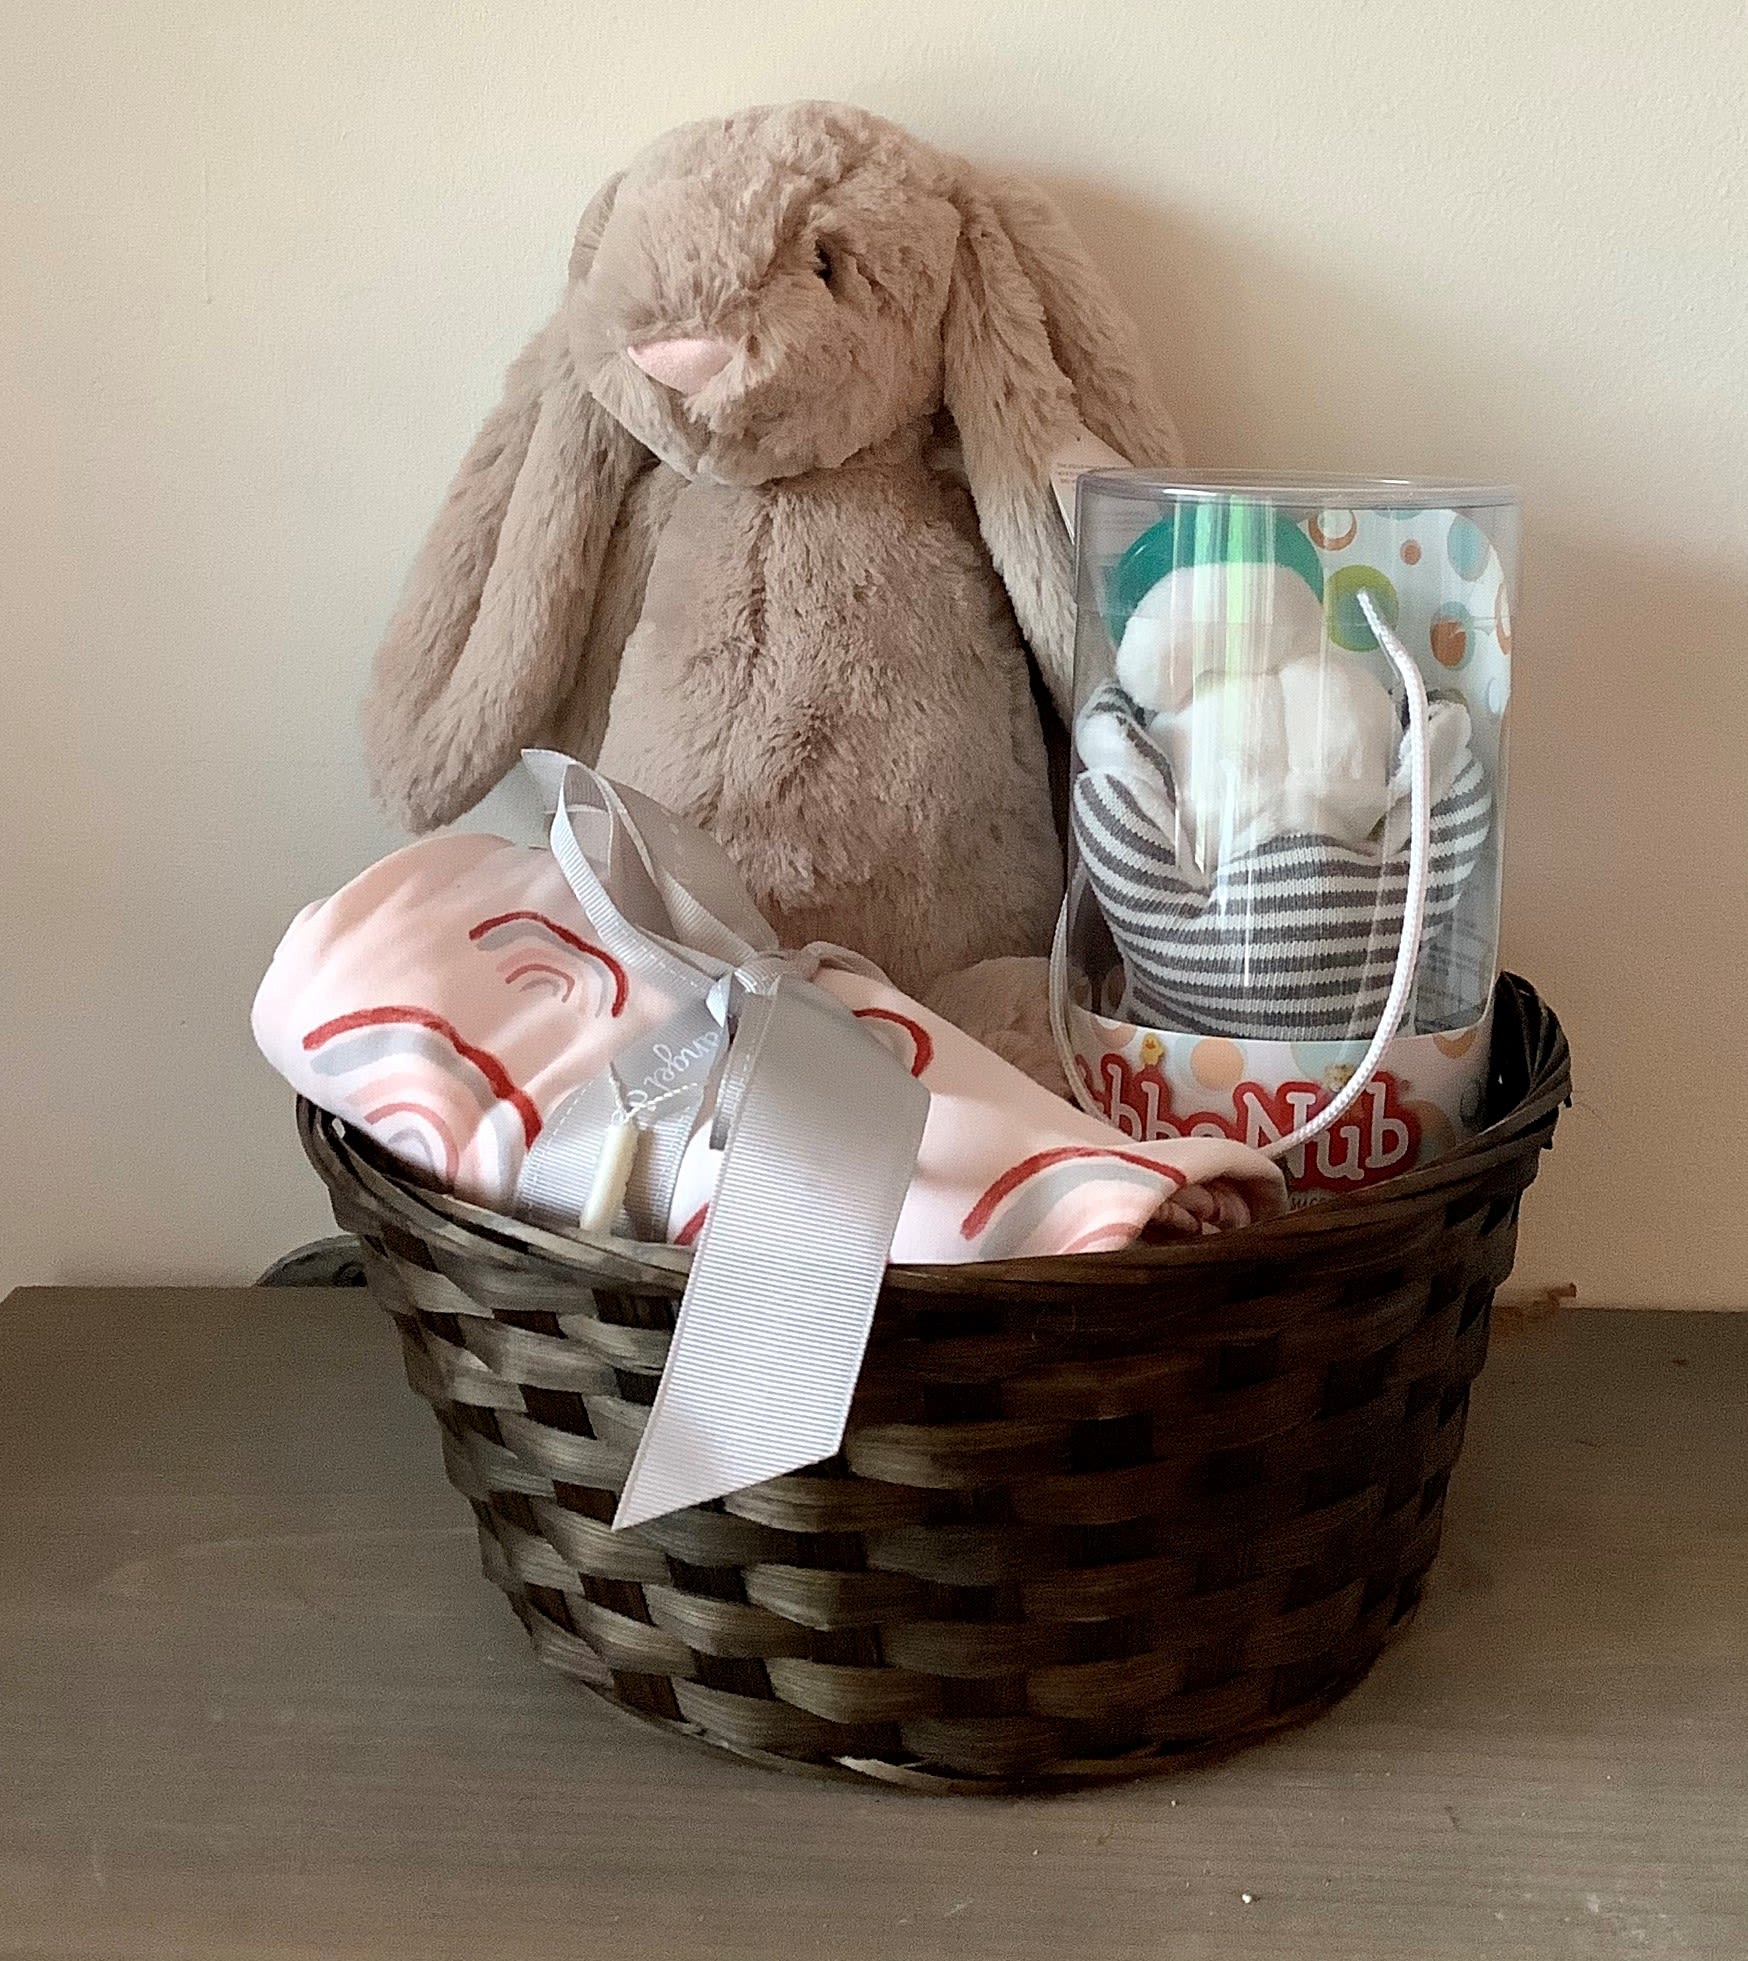 Baby Girl Gift Basket  - Send this sweet little bundle of gifts to the new baby in your life. A jellycat stuffed animal,a wubb a nubb lovie, and a receiving blanket are included. As the price increases, we will upgrade the jellycat and add more newborn goodies.